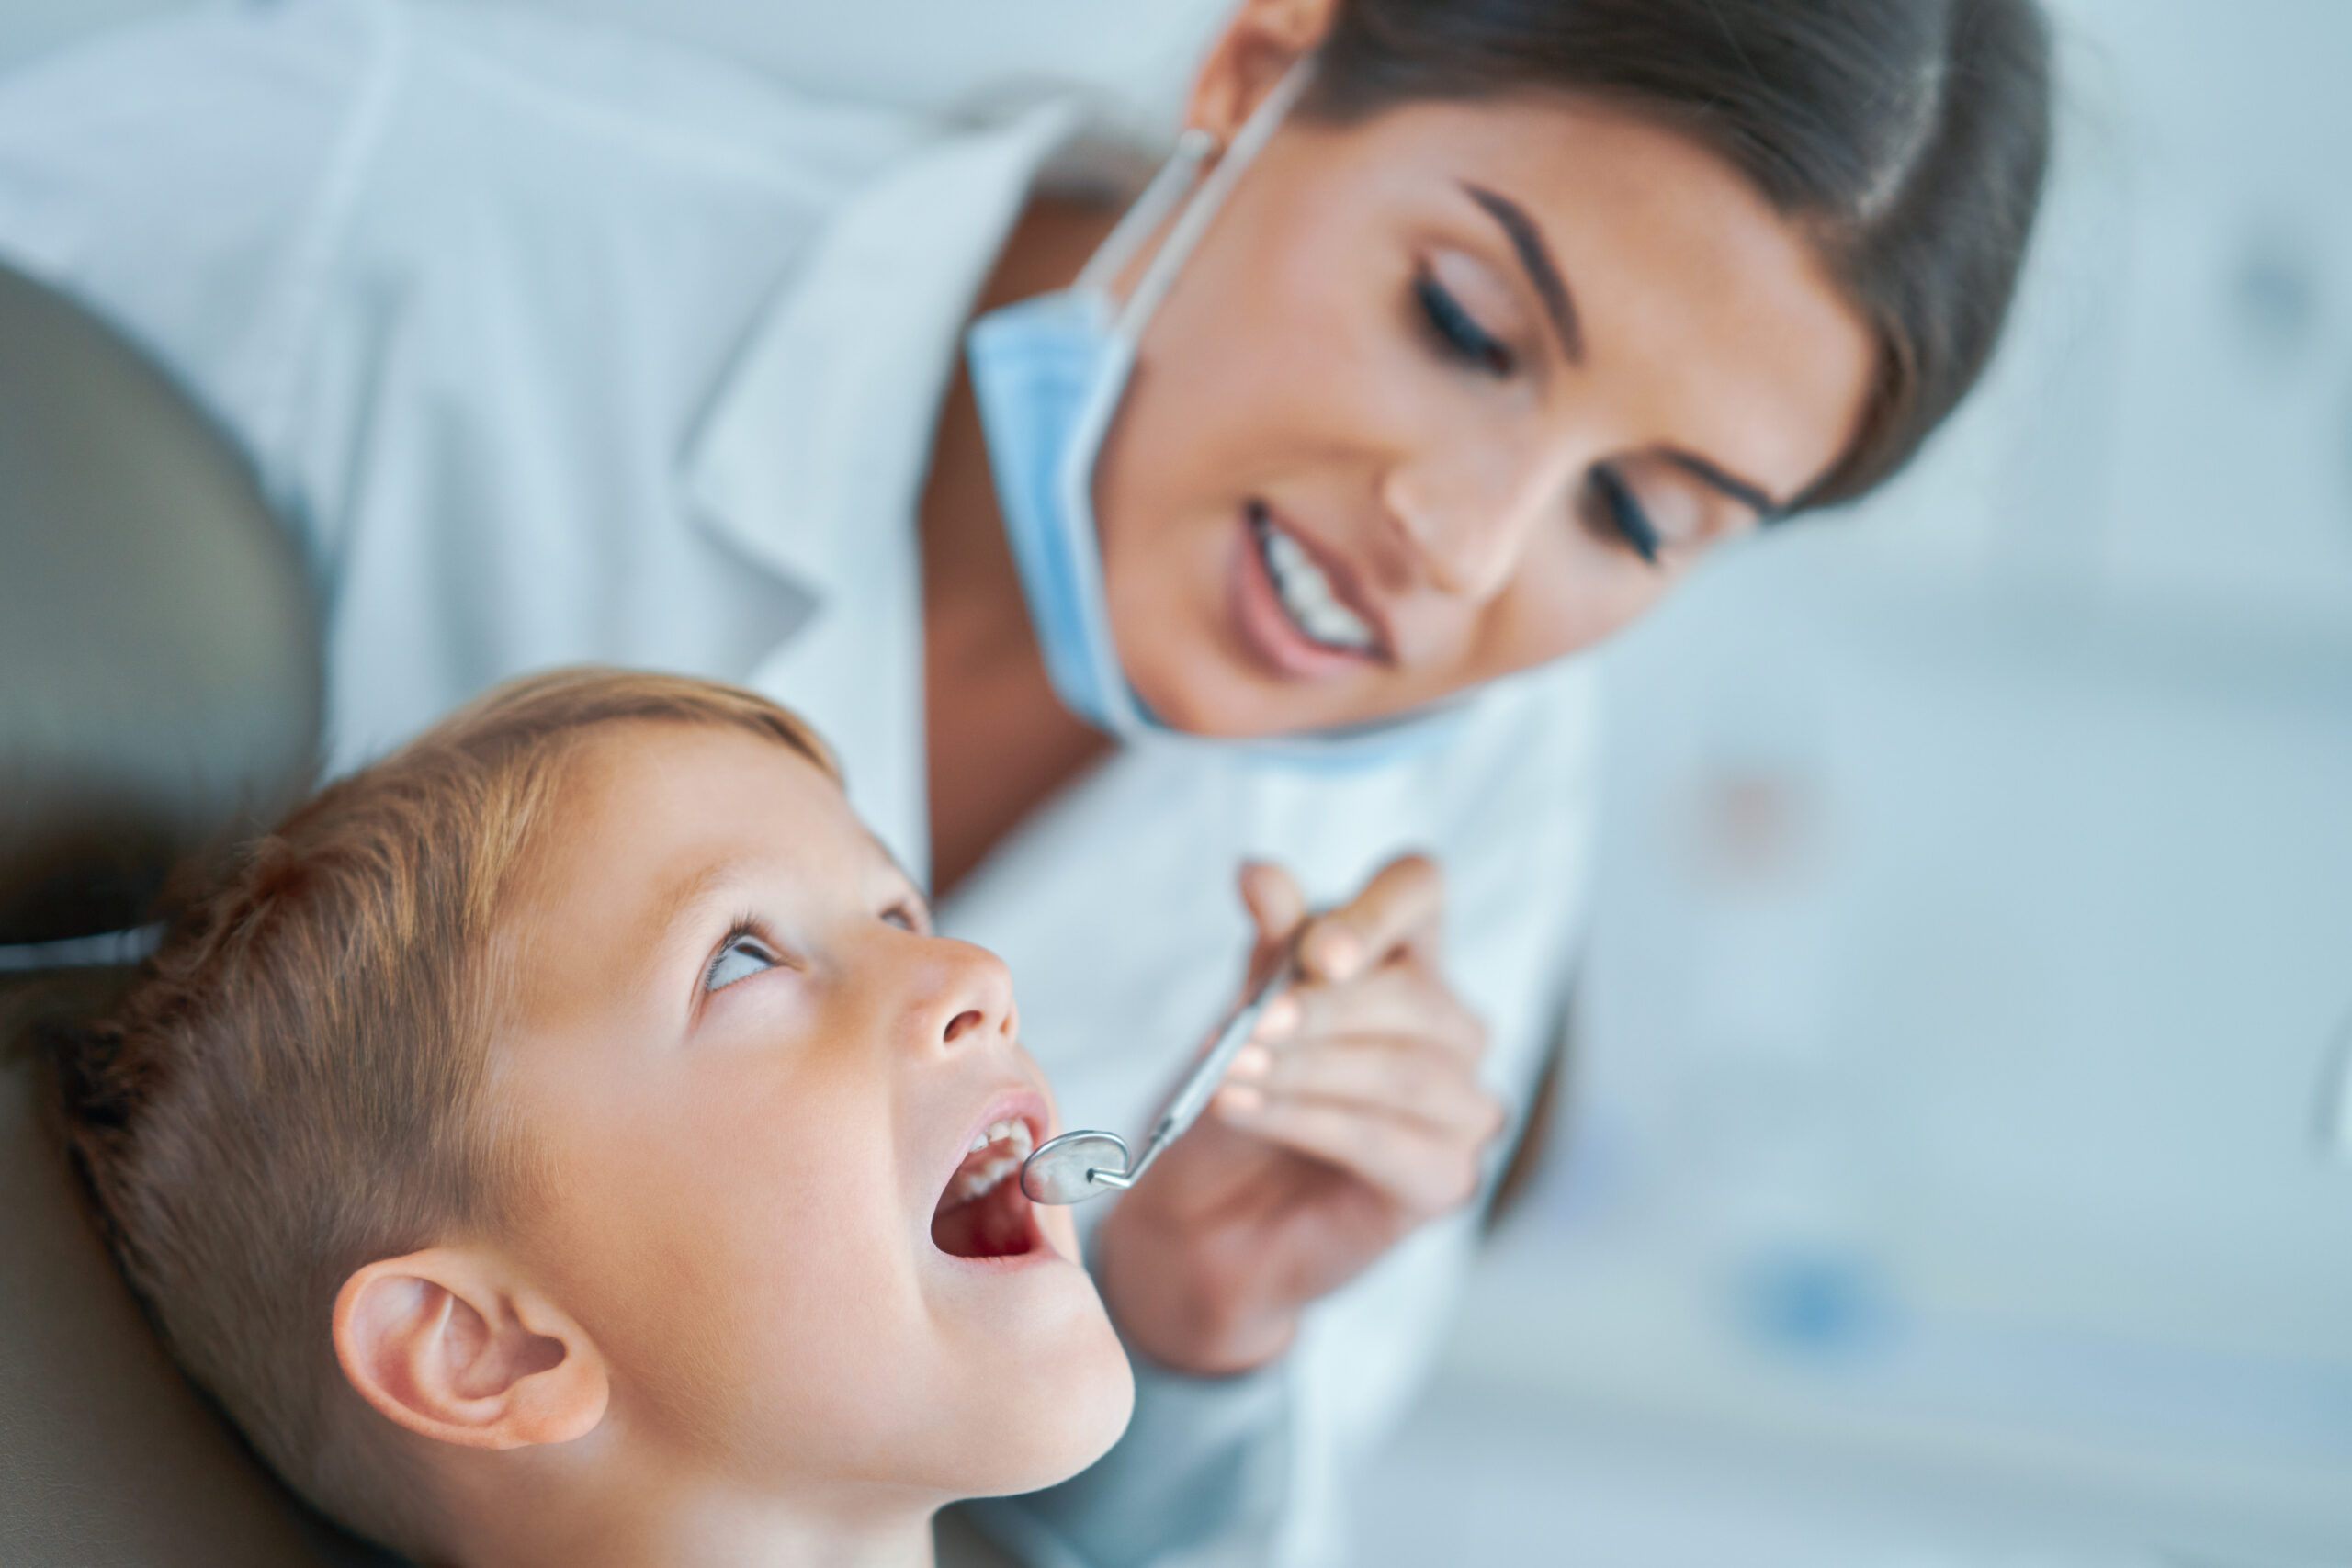 10 Compelling Reasons to Schedule Your Child’s First Orthodontic Assessment by Age 7